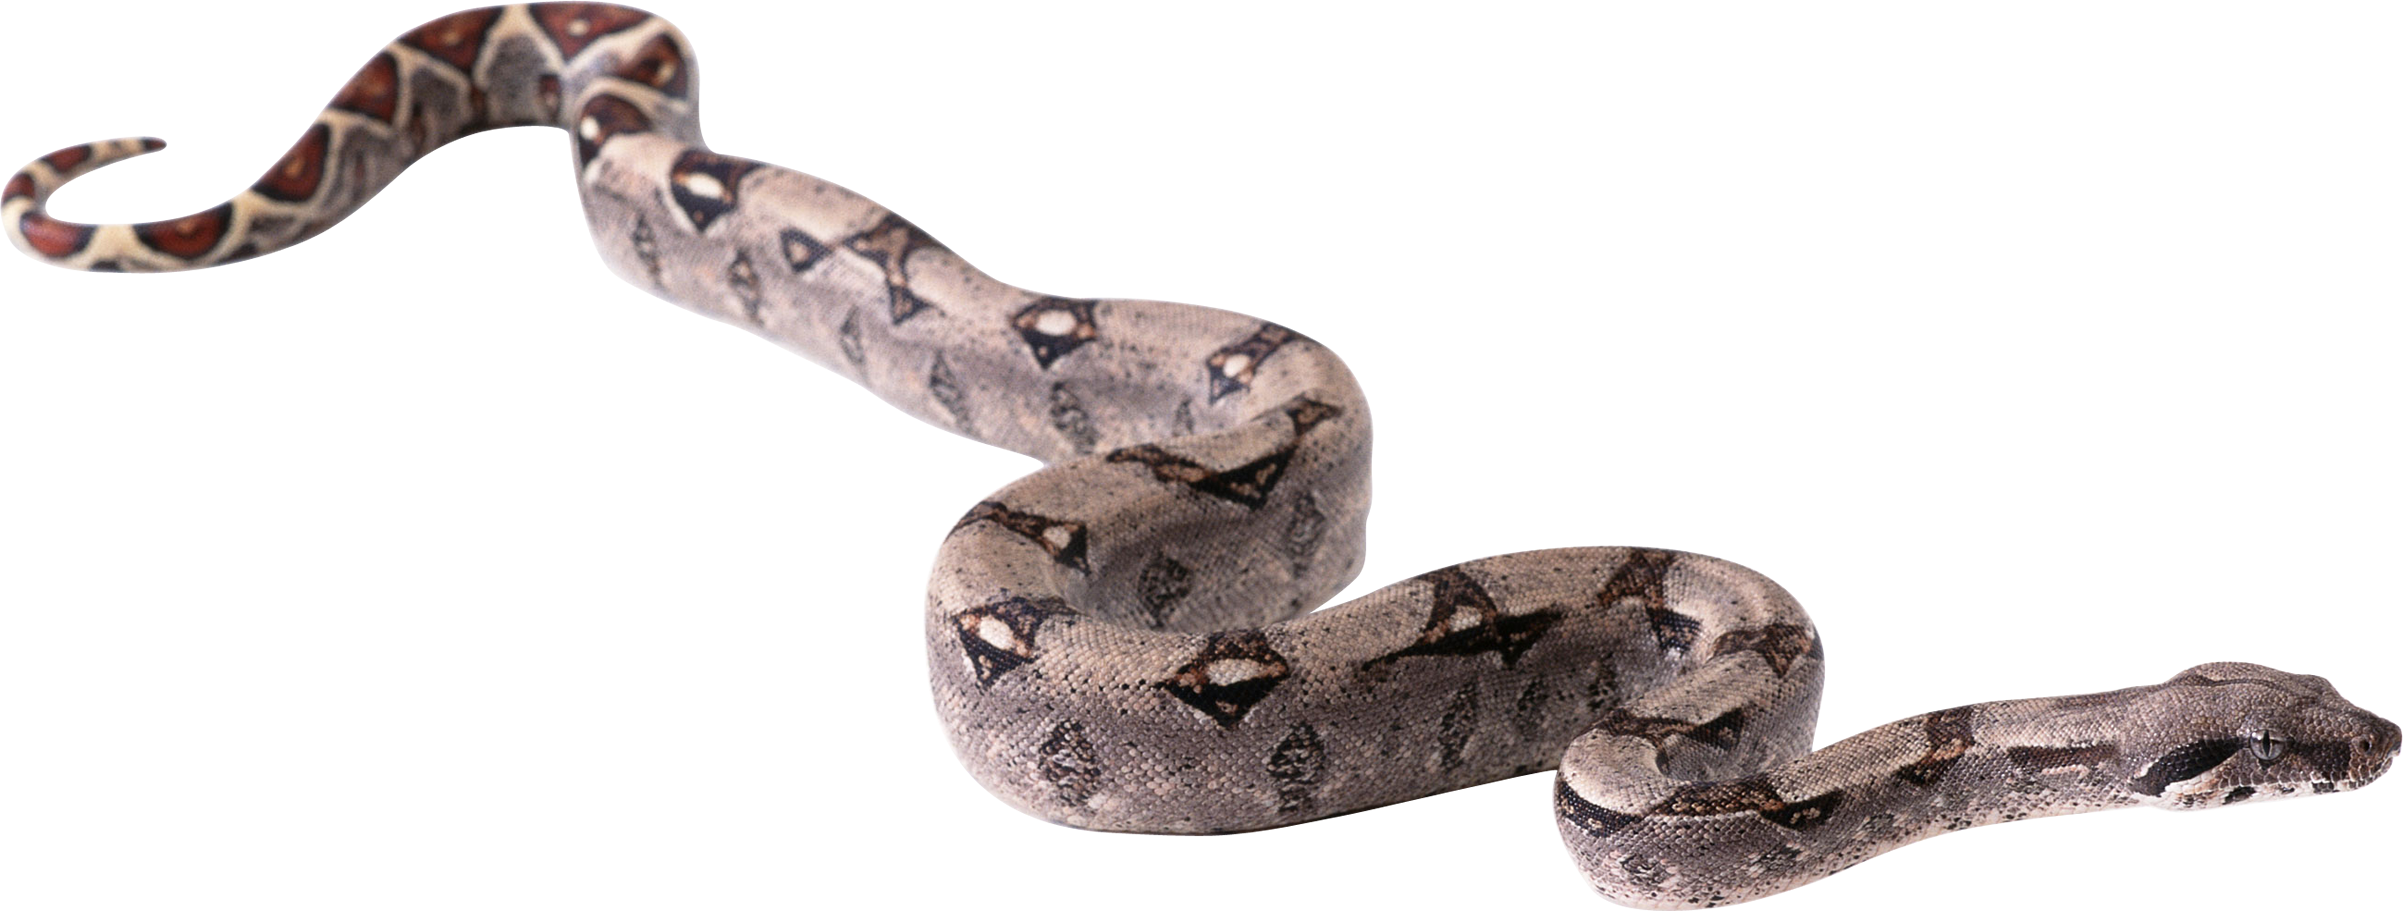 PNG HD Snake - 148723